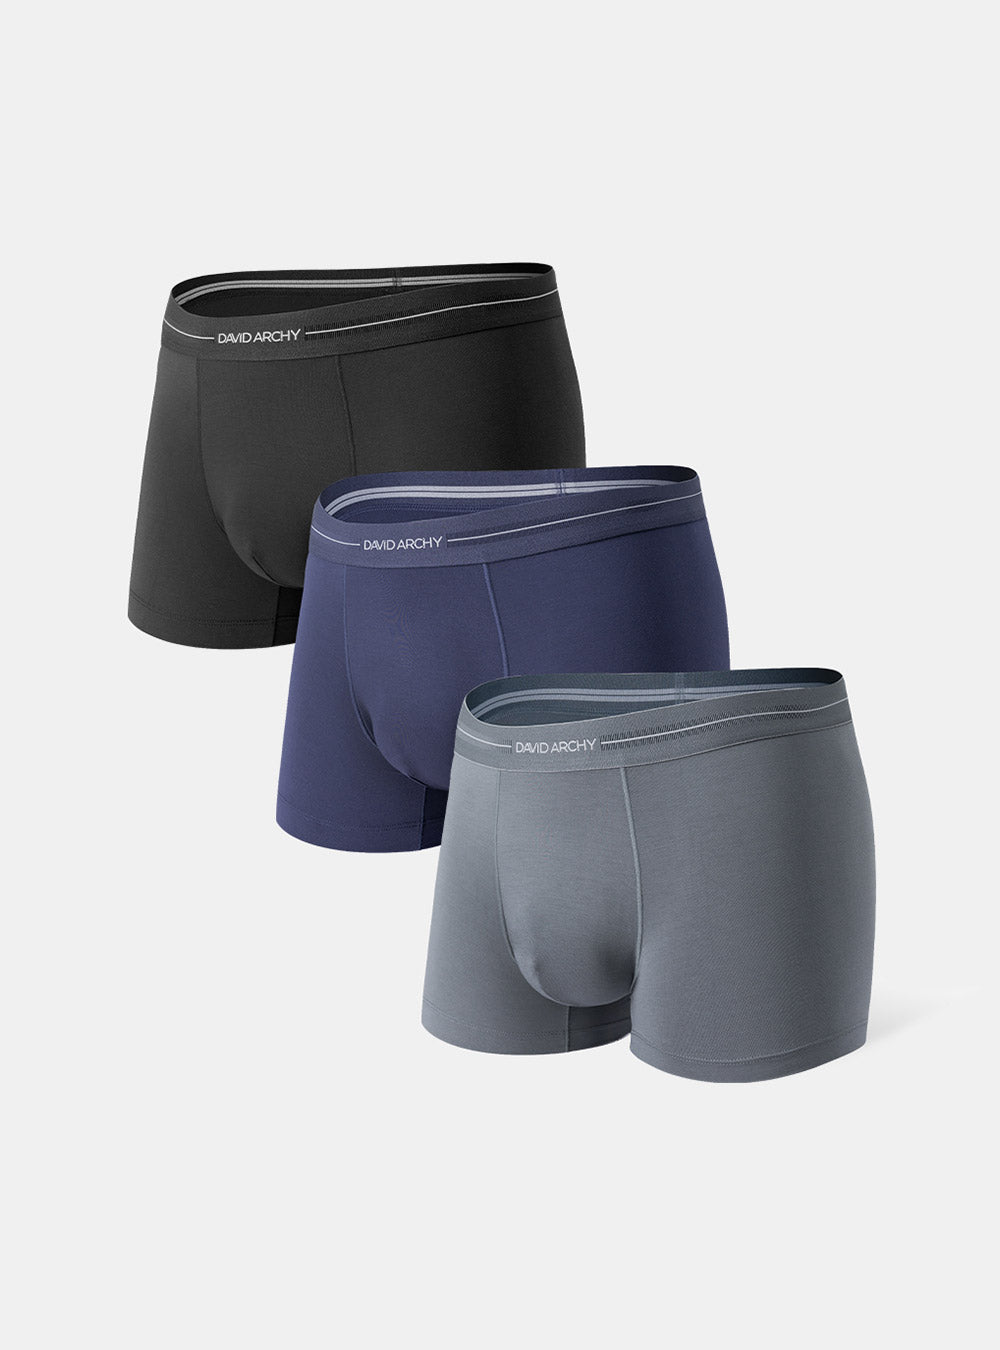 David Archy 3 Packs MicroModal Trunks with Pouch Support